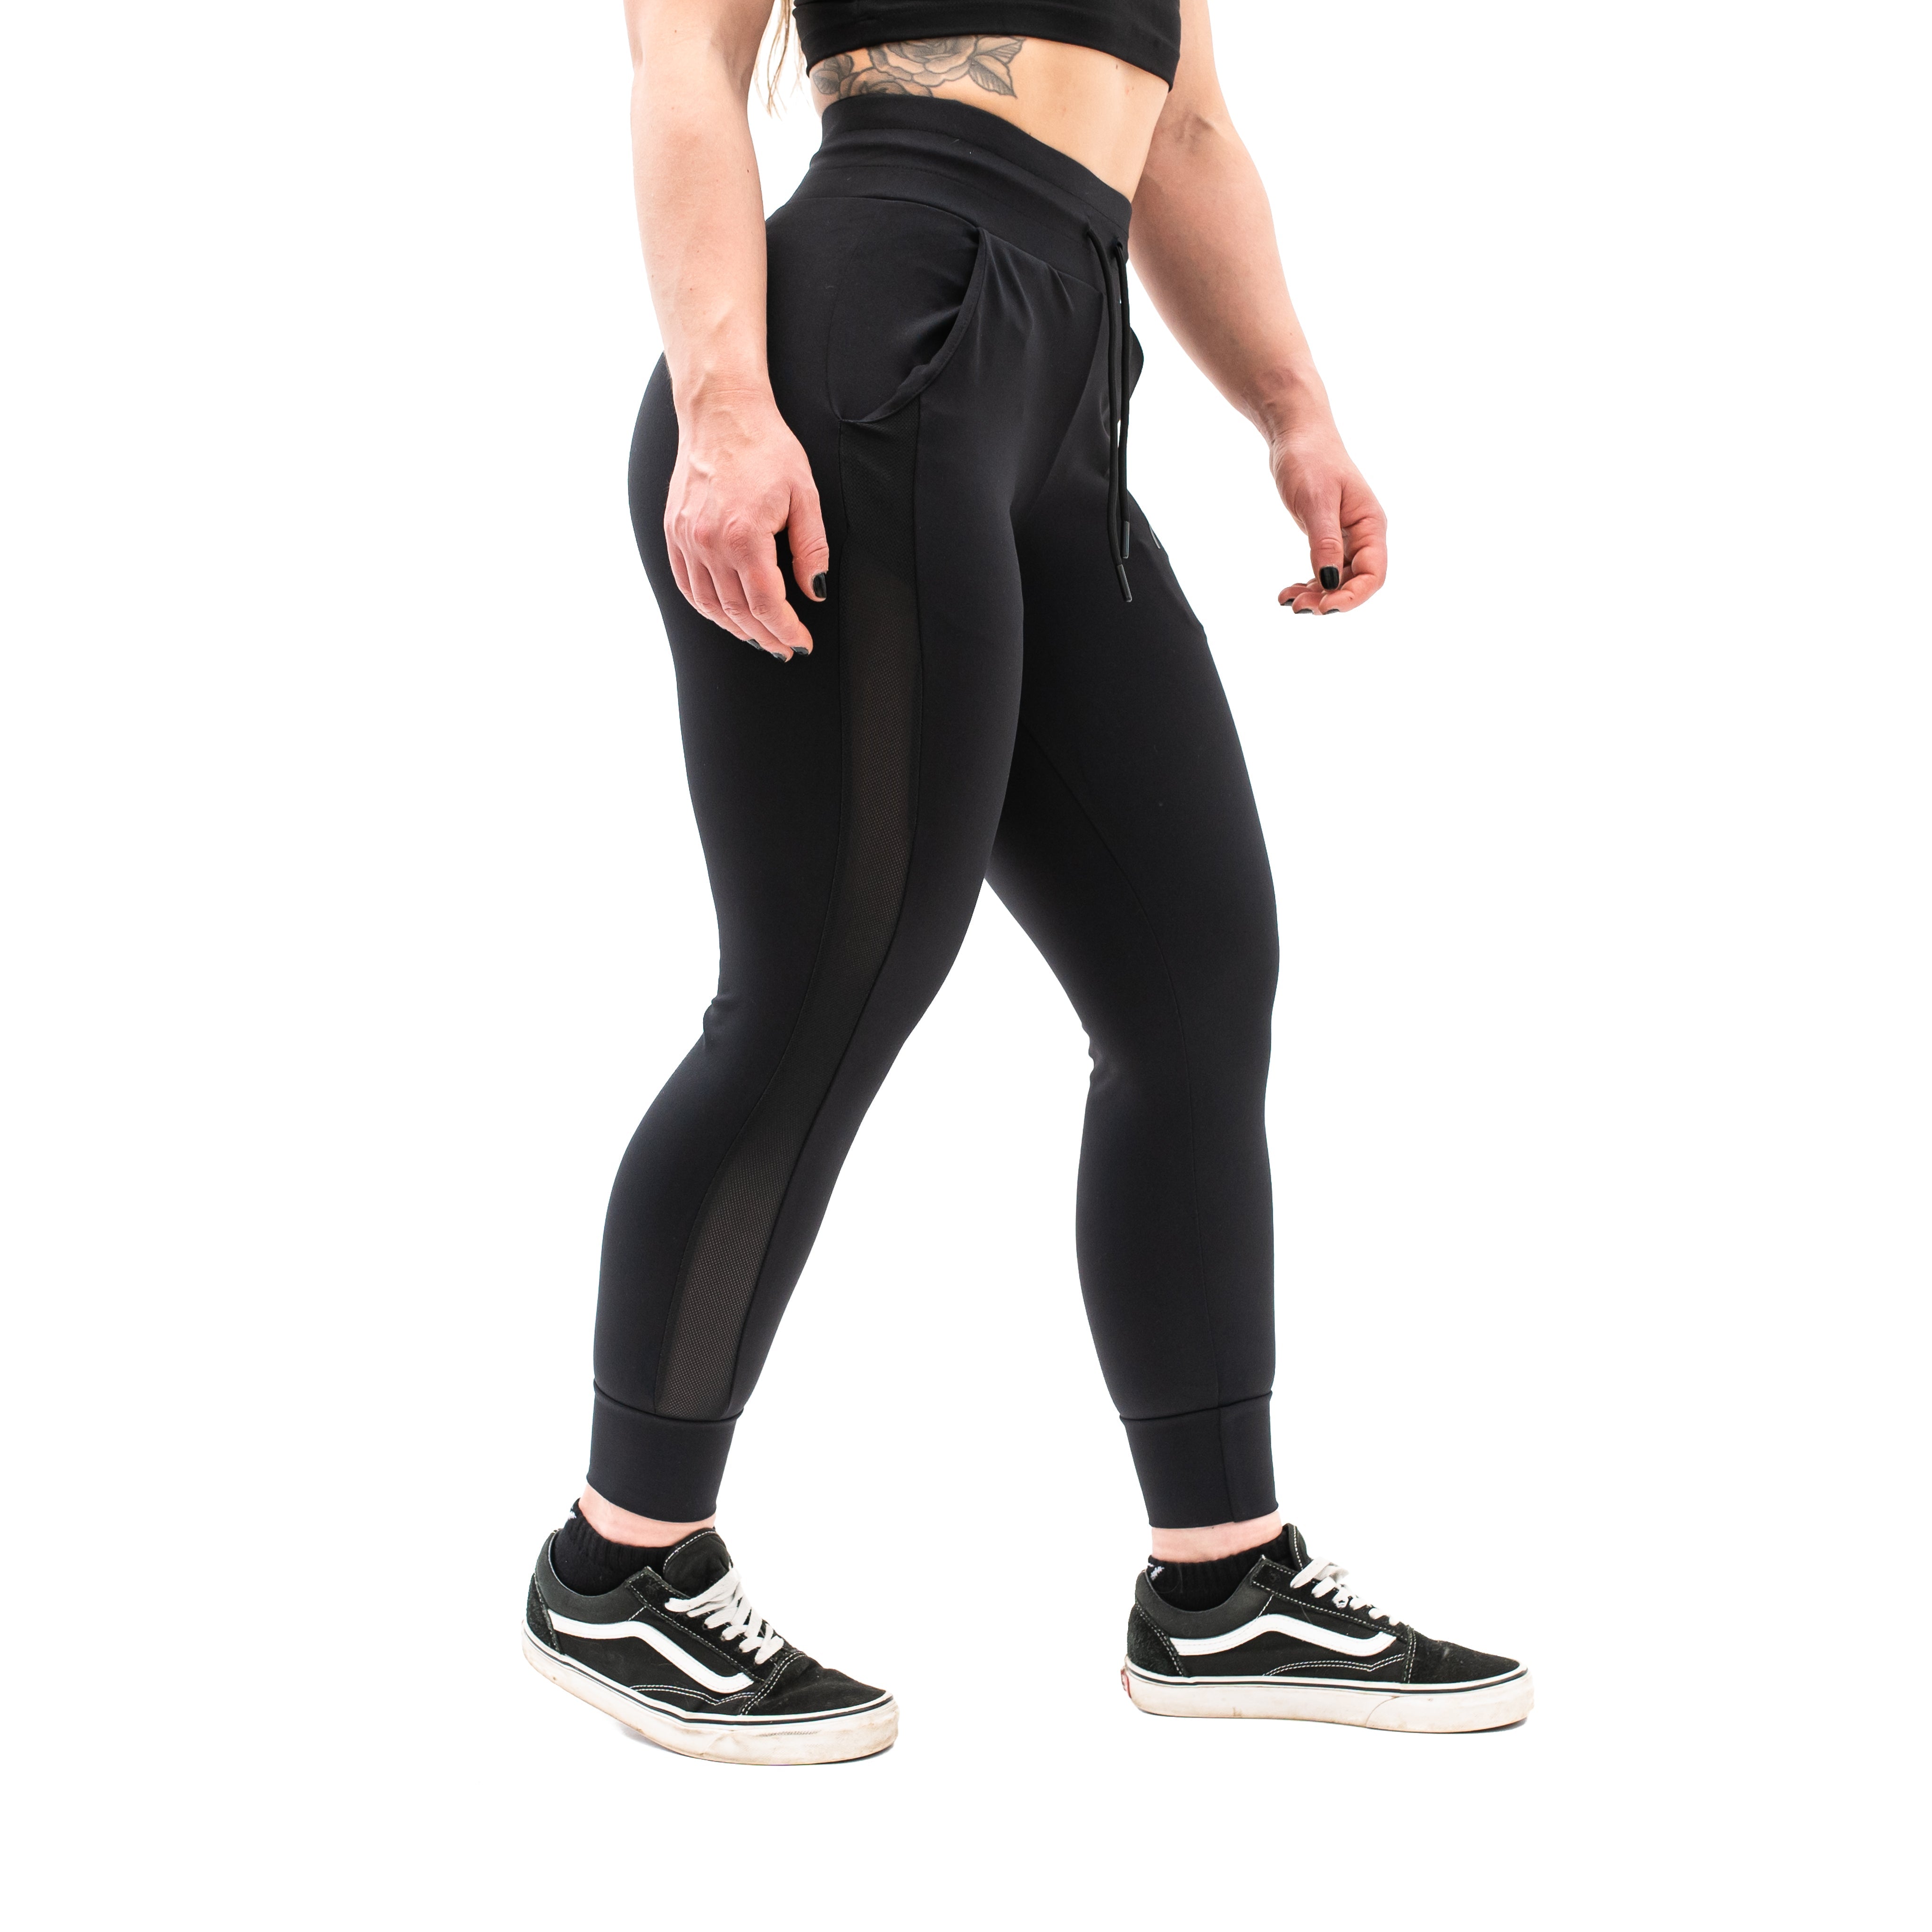 A7’s newest Women's Joggers are made with the same premium Defy fabric you have come to love, but with female curves (flexure) in mind! Using 4-way-stretch material, these flexure joggers are specifically designed for Women's unique shape. Flexure women’s joggers in night are available to buy from A7UK for shipping to UK and Europe. 